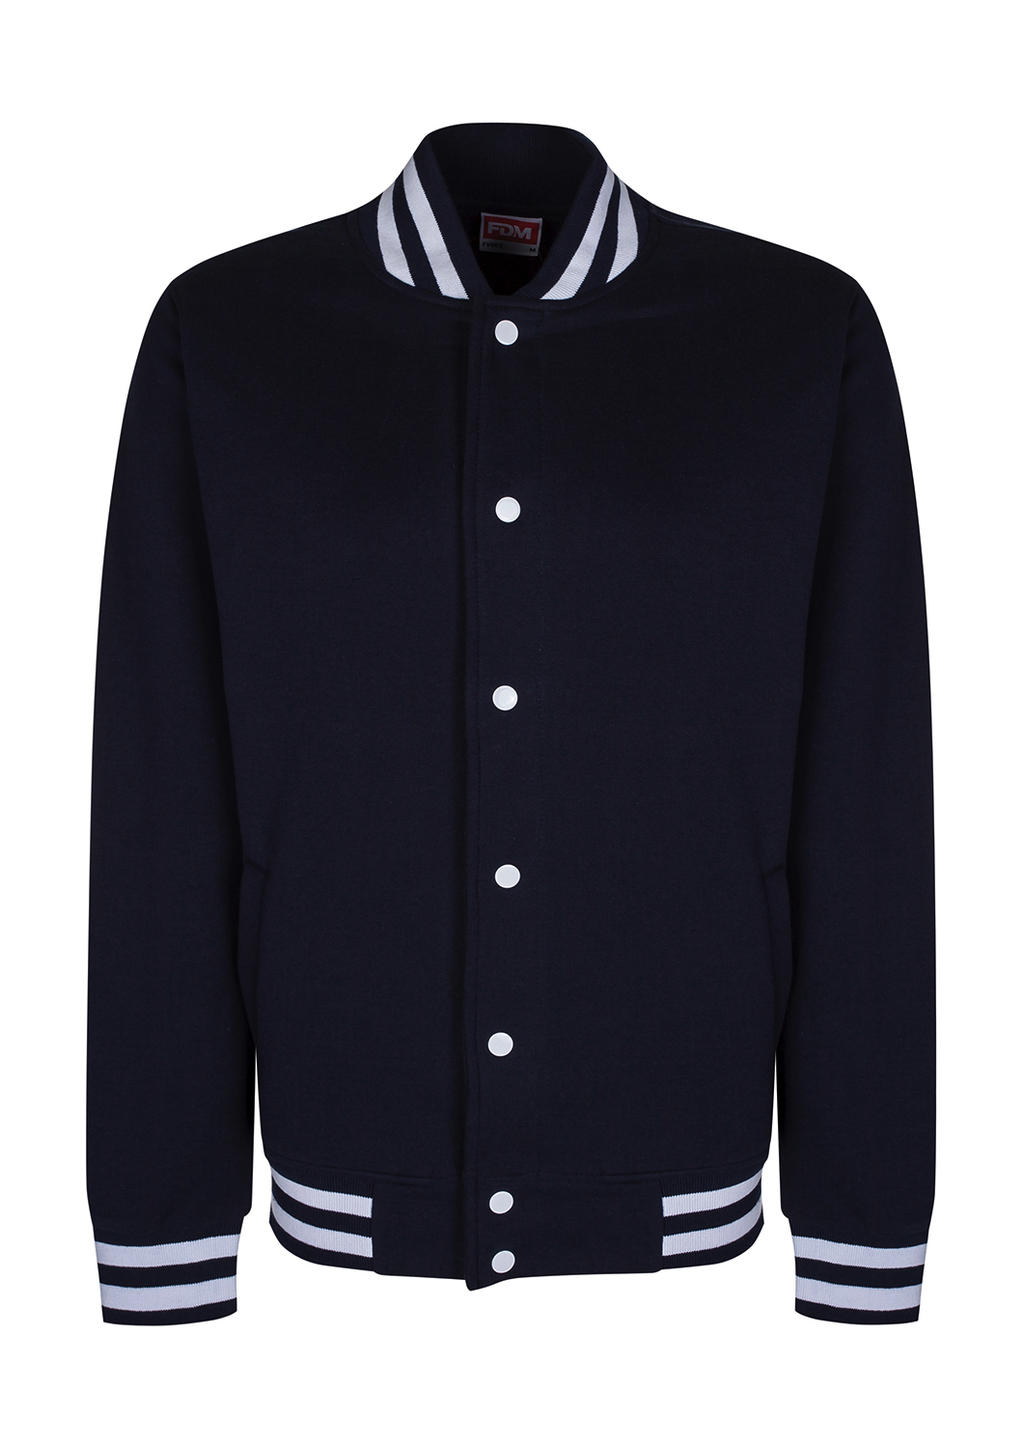  Campus Jacket in Farbe Navy/White